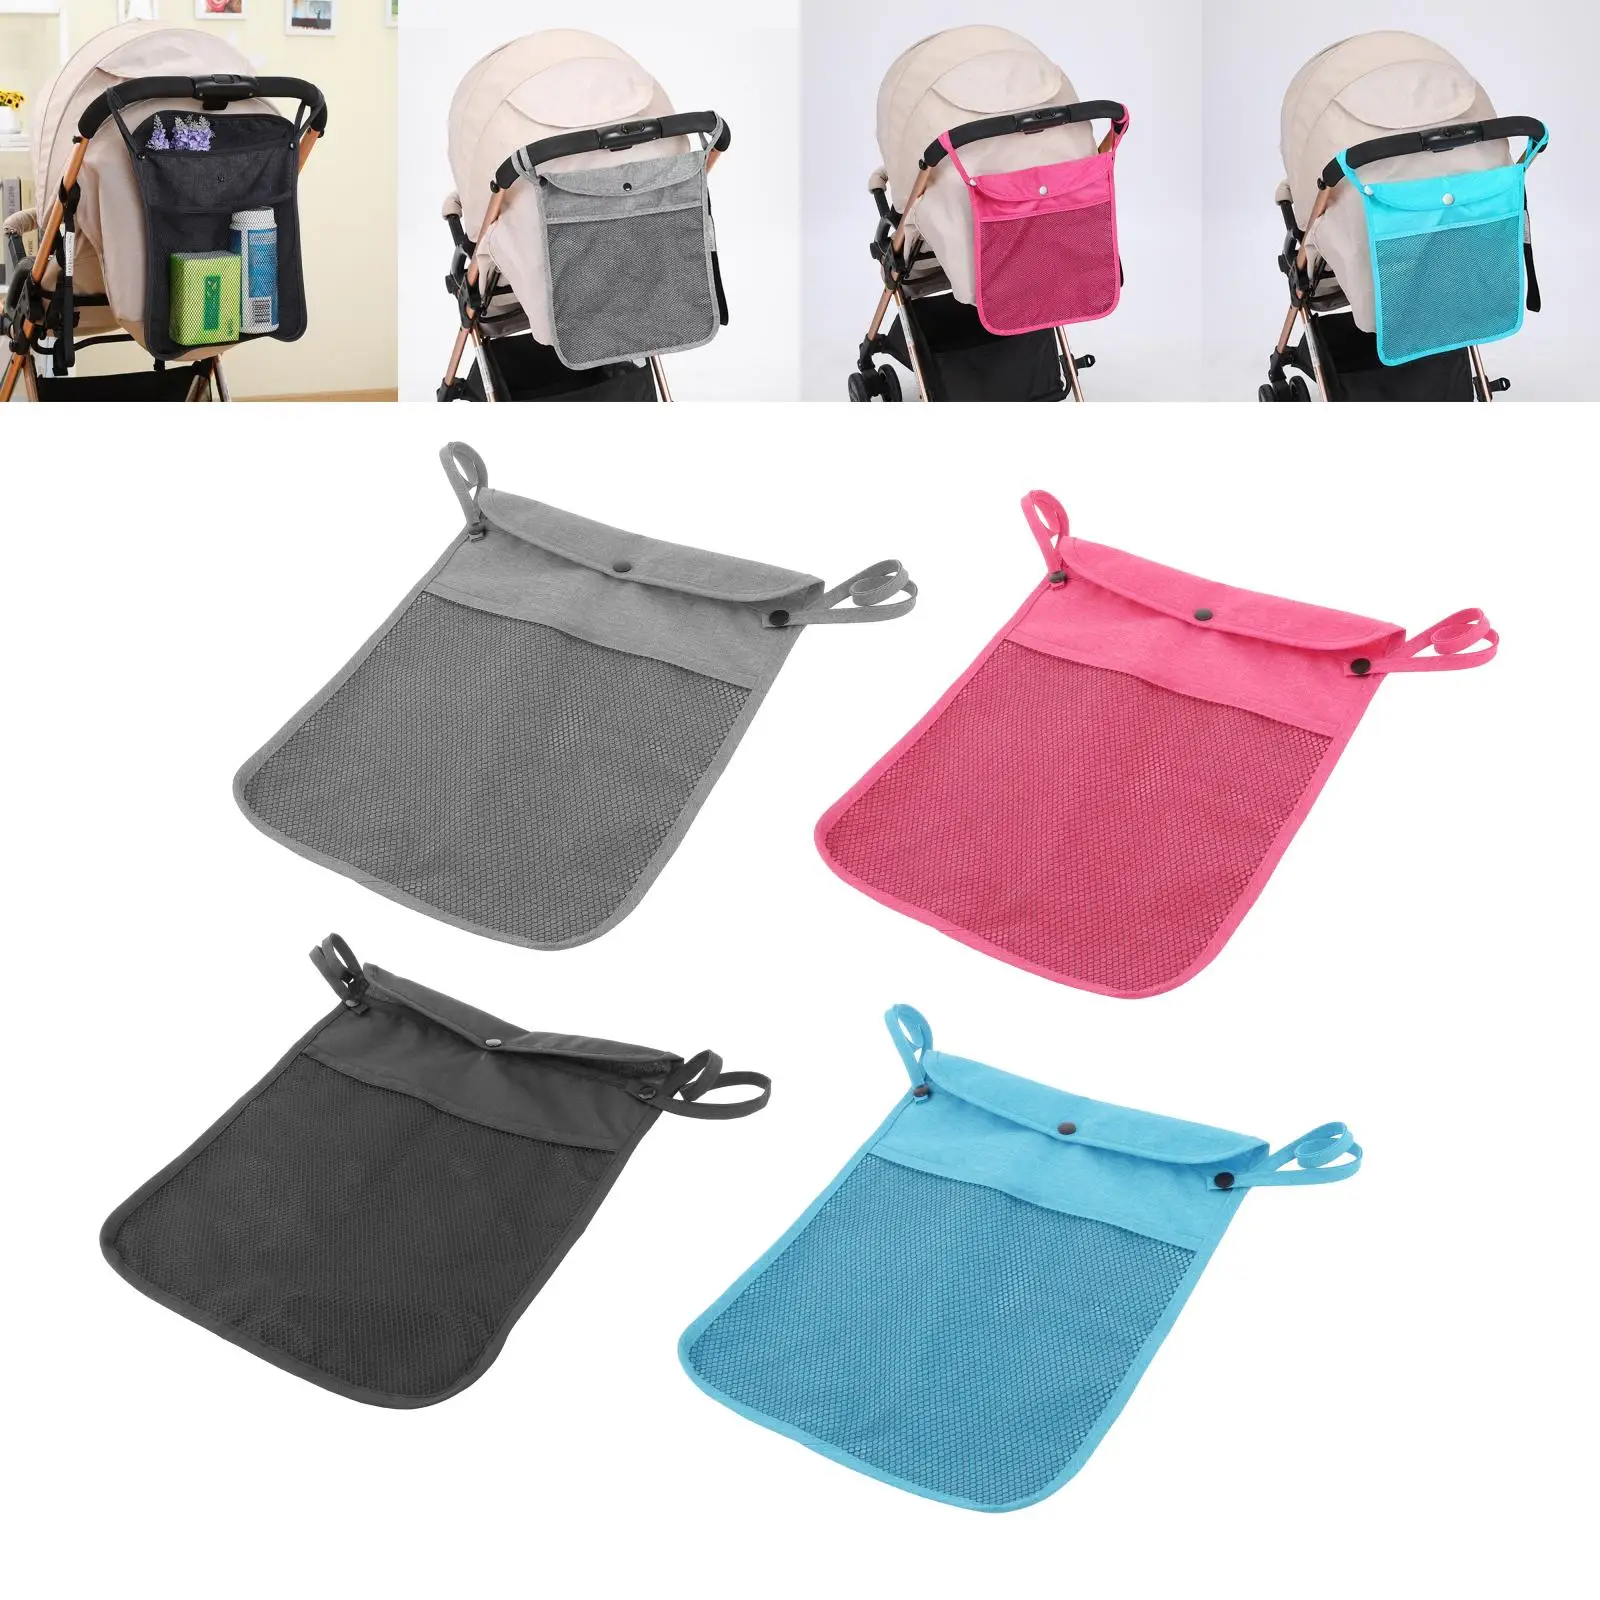 Baby Stroller Bag Large Capacity Diaper Bags Outdoor Travel Hanging Carriage Mommy Bag Infant Care Organizer